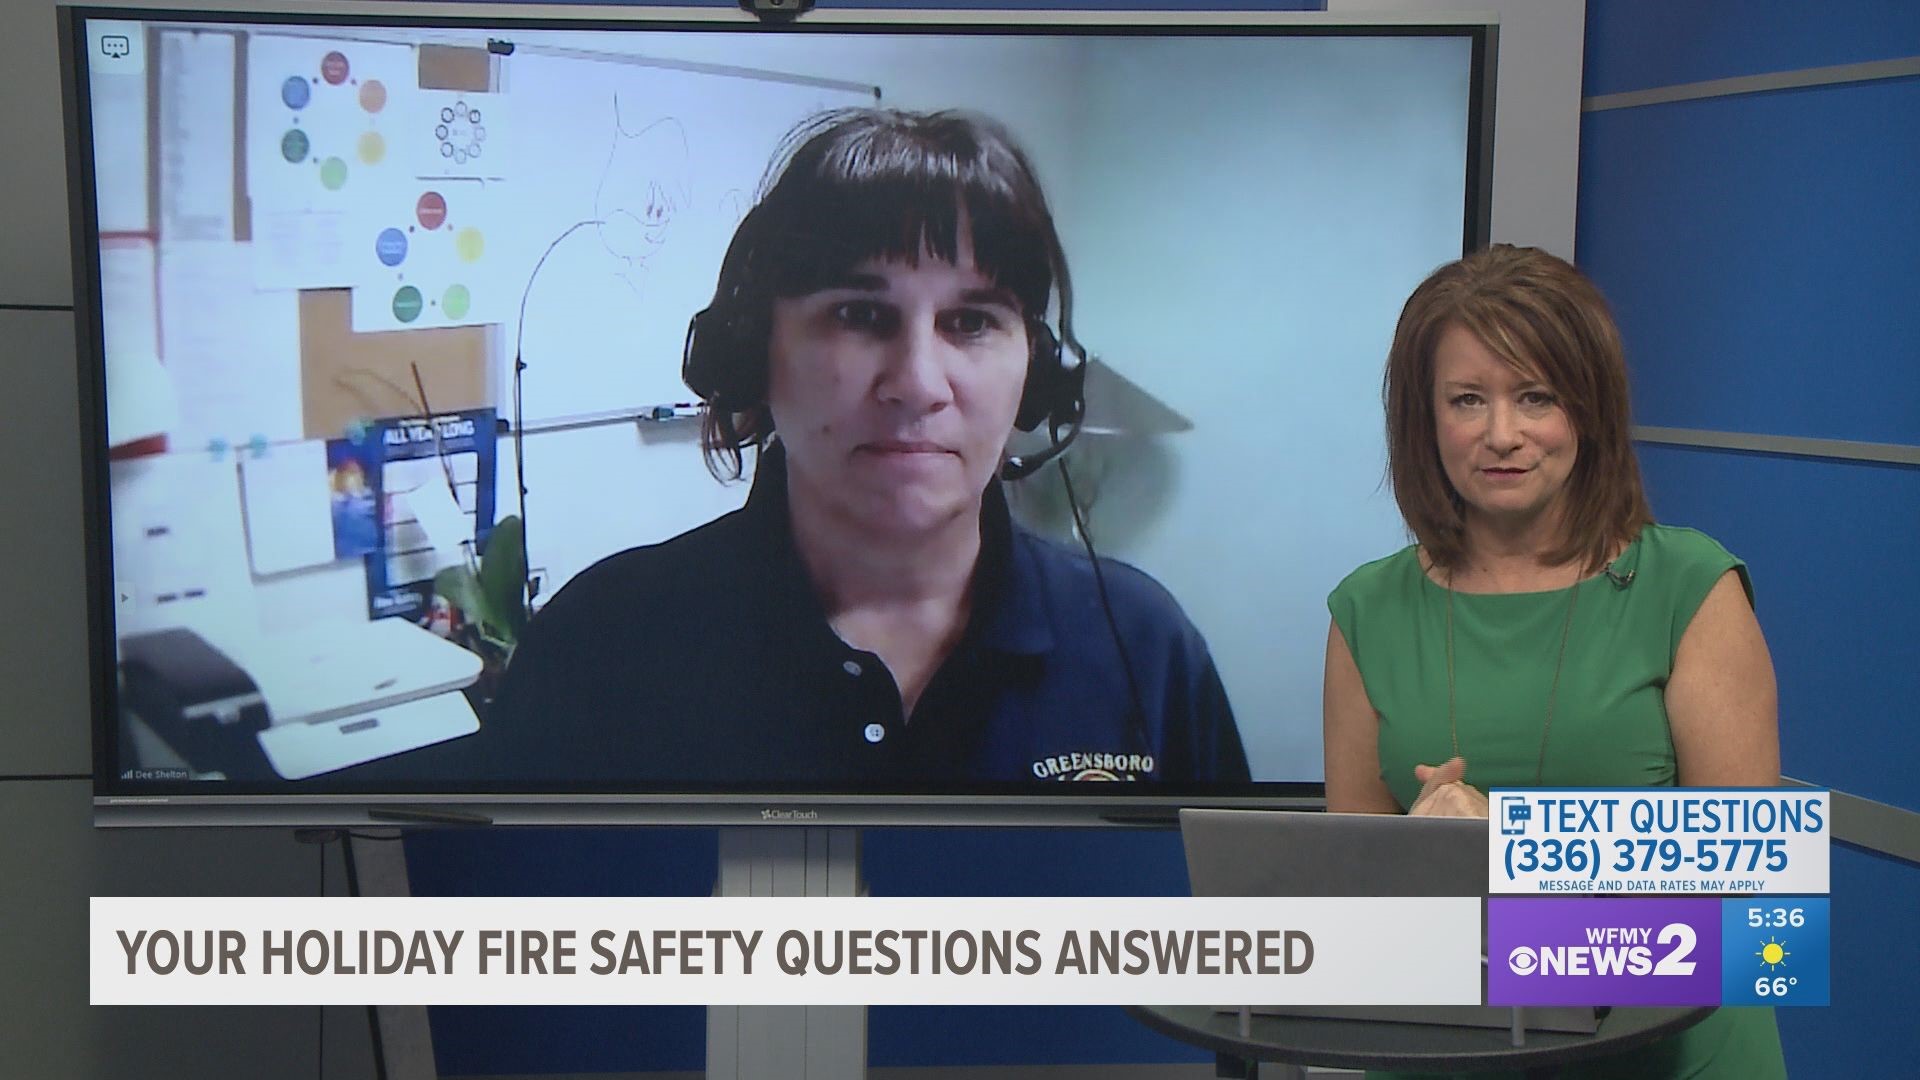 Dee Shelton from the Greensboro Fire Department answers your holiday fire safety questions.